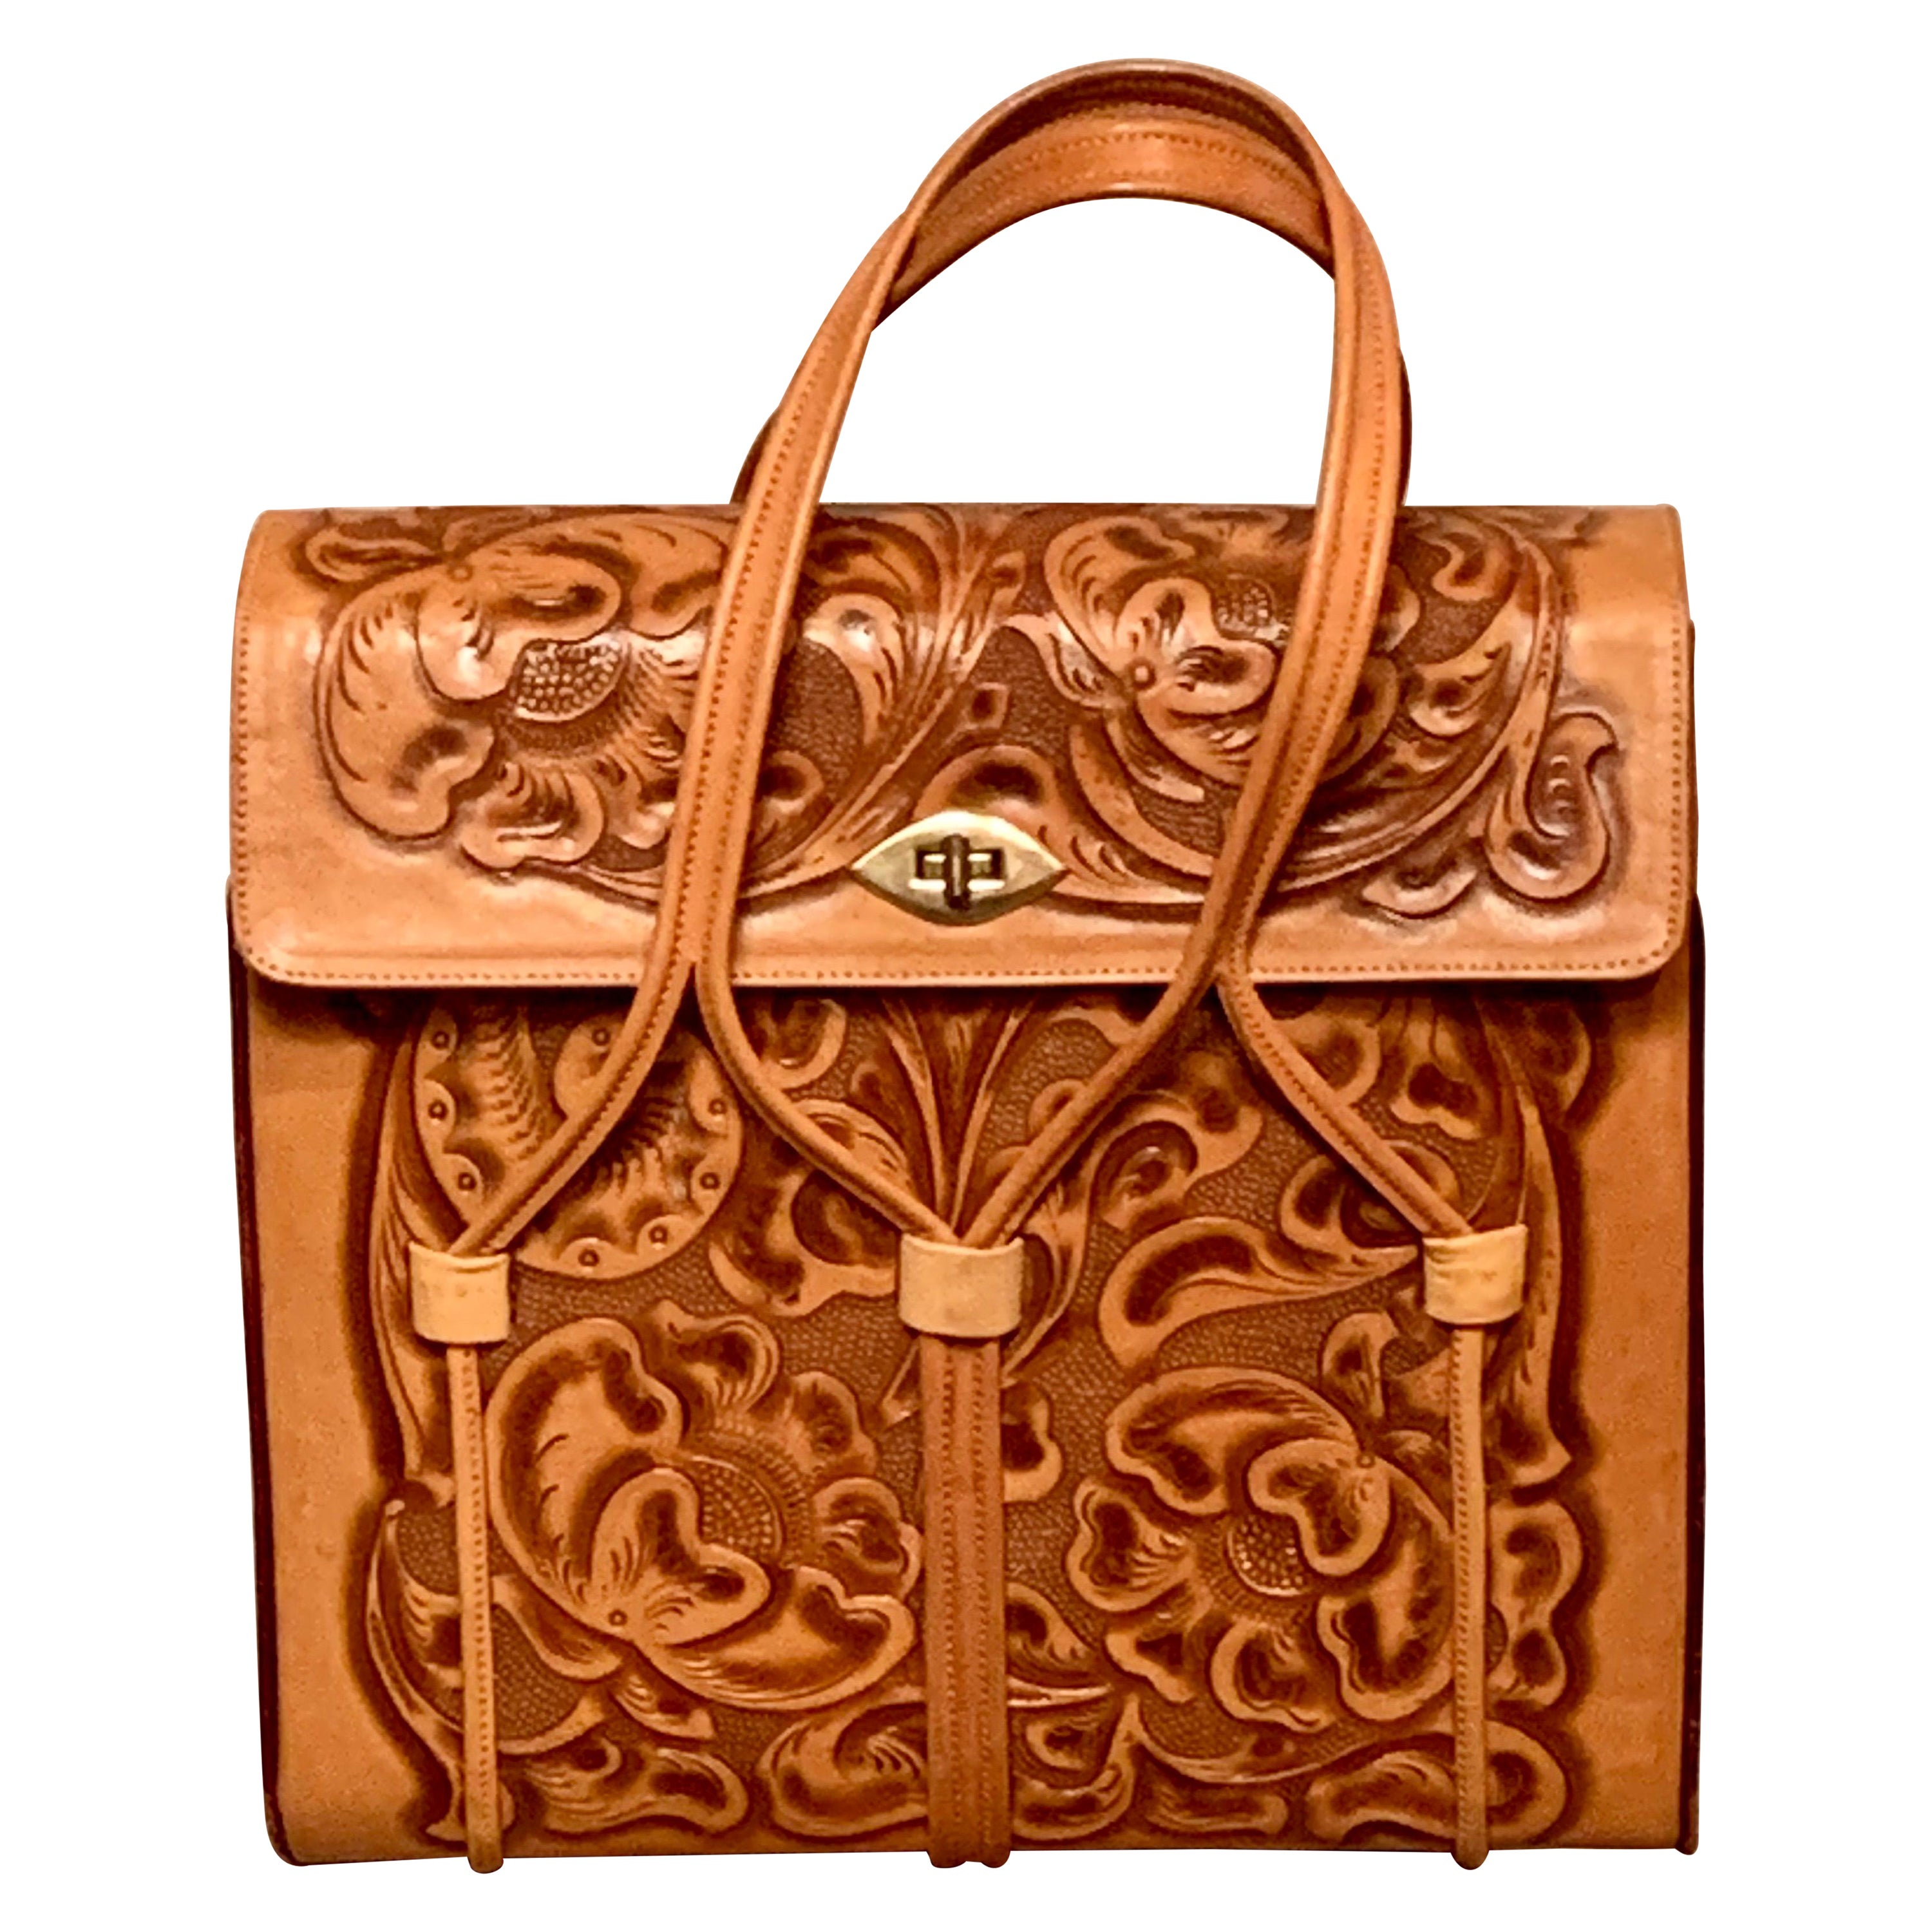 Made in Mexico Hand Tooled Large Handbag or Tote